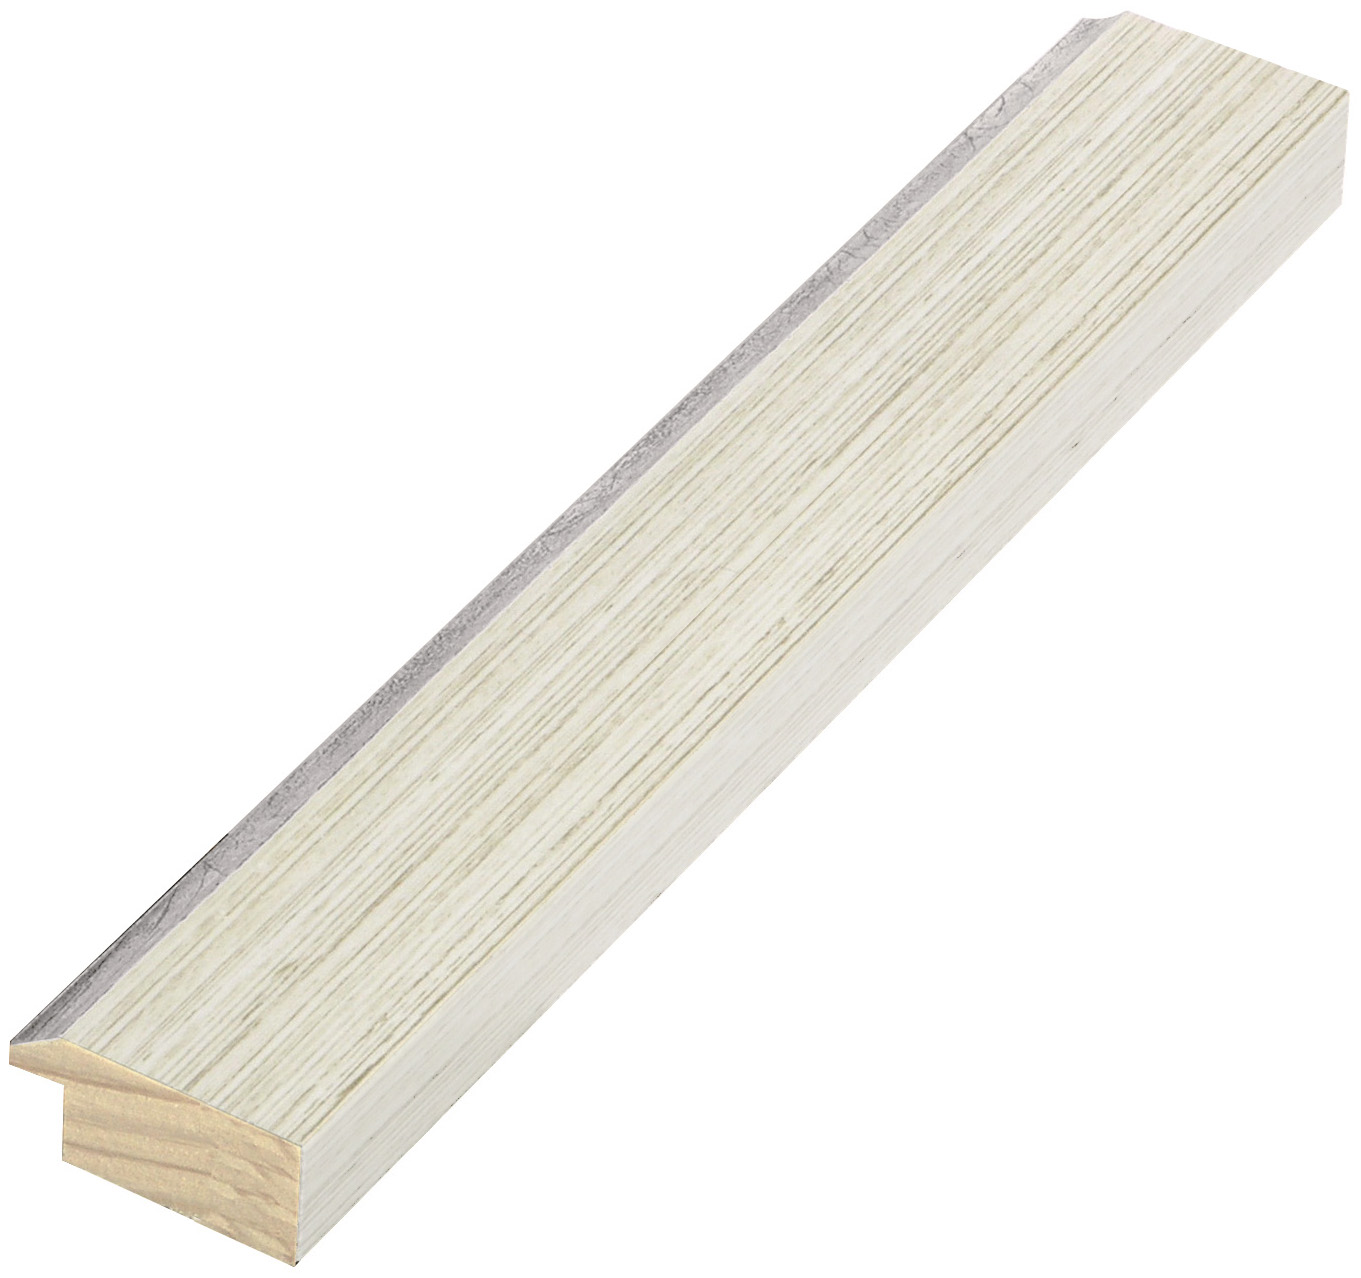 Liner finger-jointed pine 28mm - Cream, silver sight edge